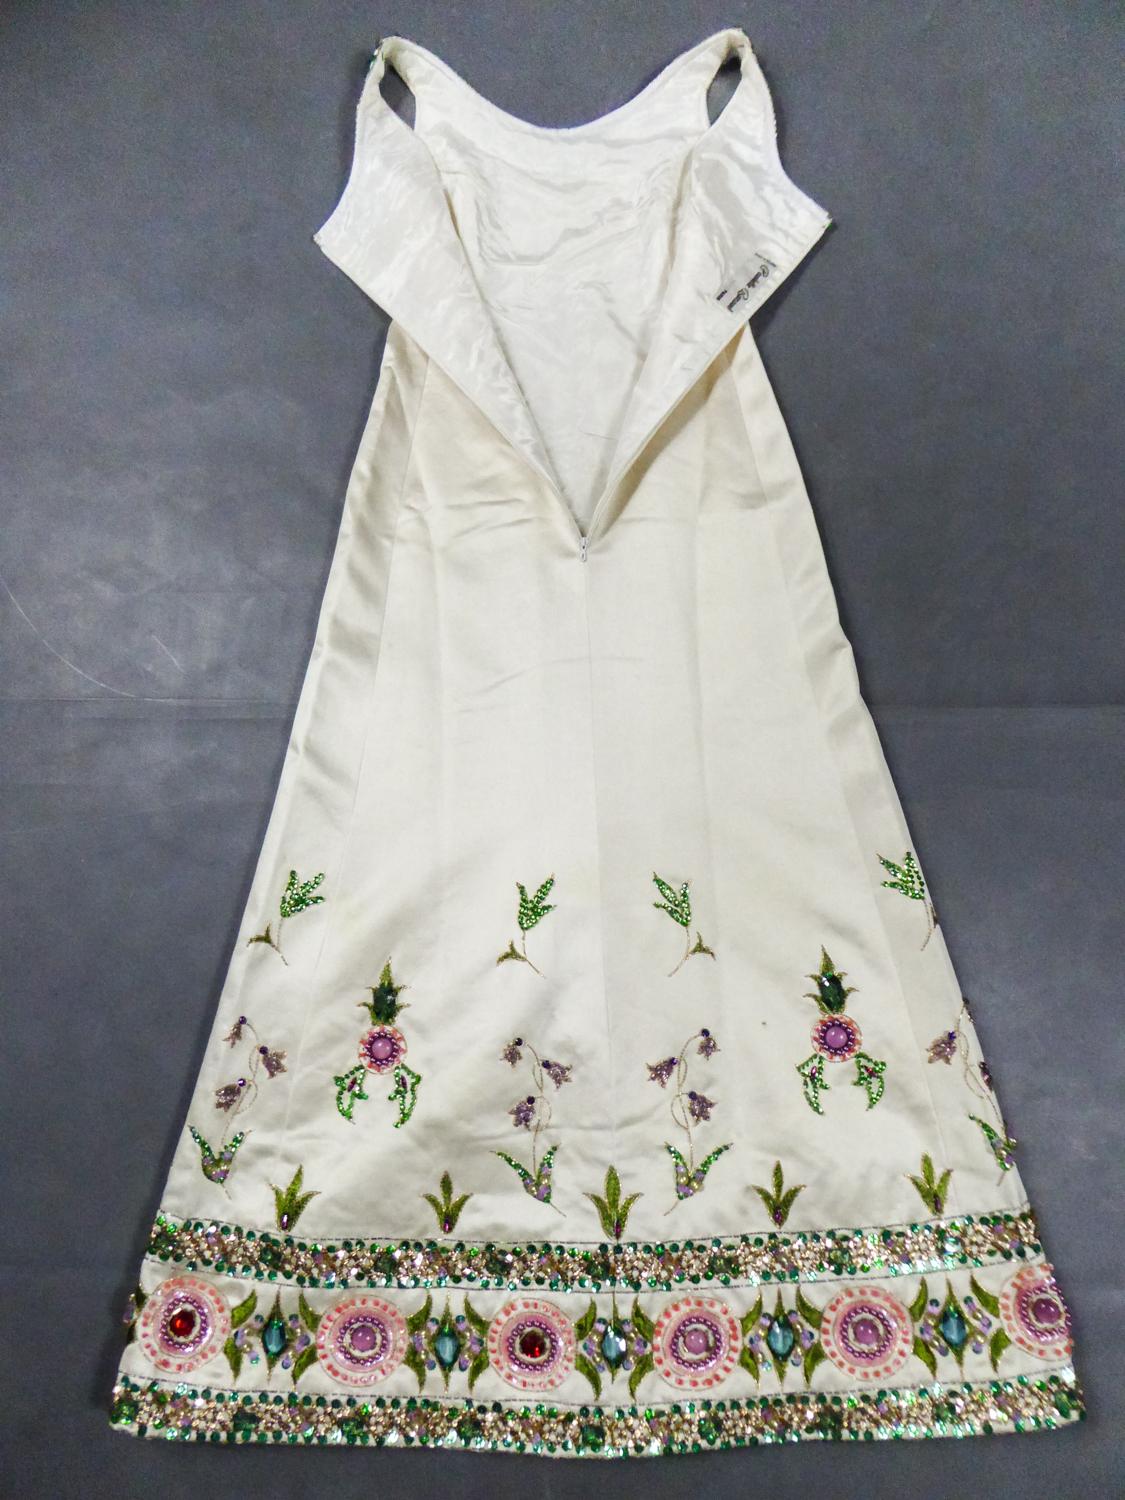 Circa 1968
France

Dress in cream silk satin richly embroidered signed by Paulette Buraud from the late 1960s. Impressive embroidery on the collar and bottom of the skirt, with green, purple, gold spangles and sequins, colorful pearls and